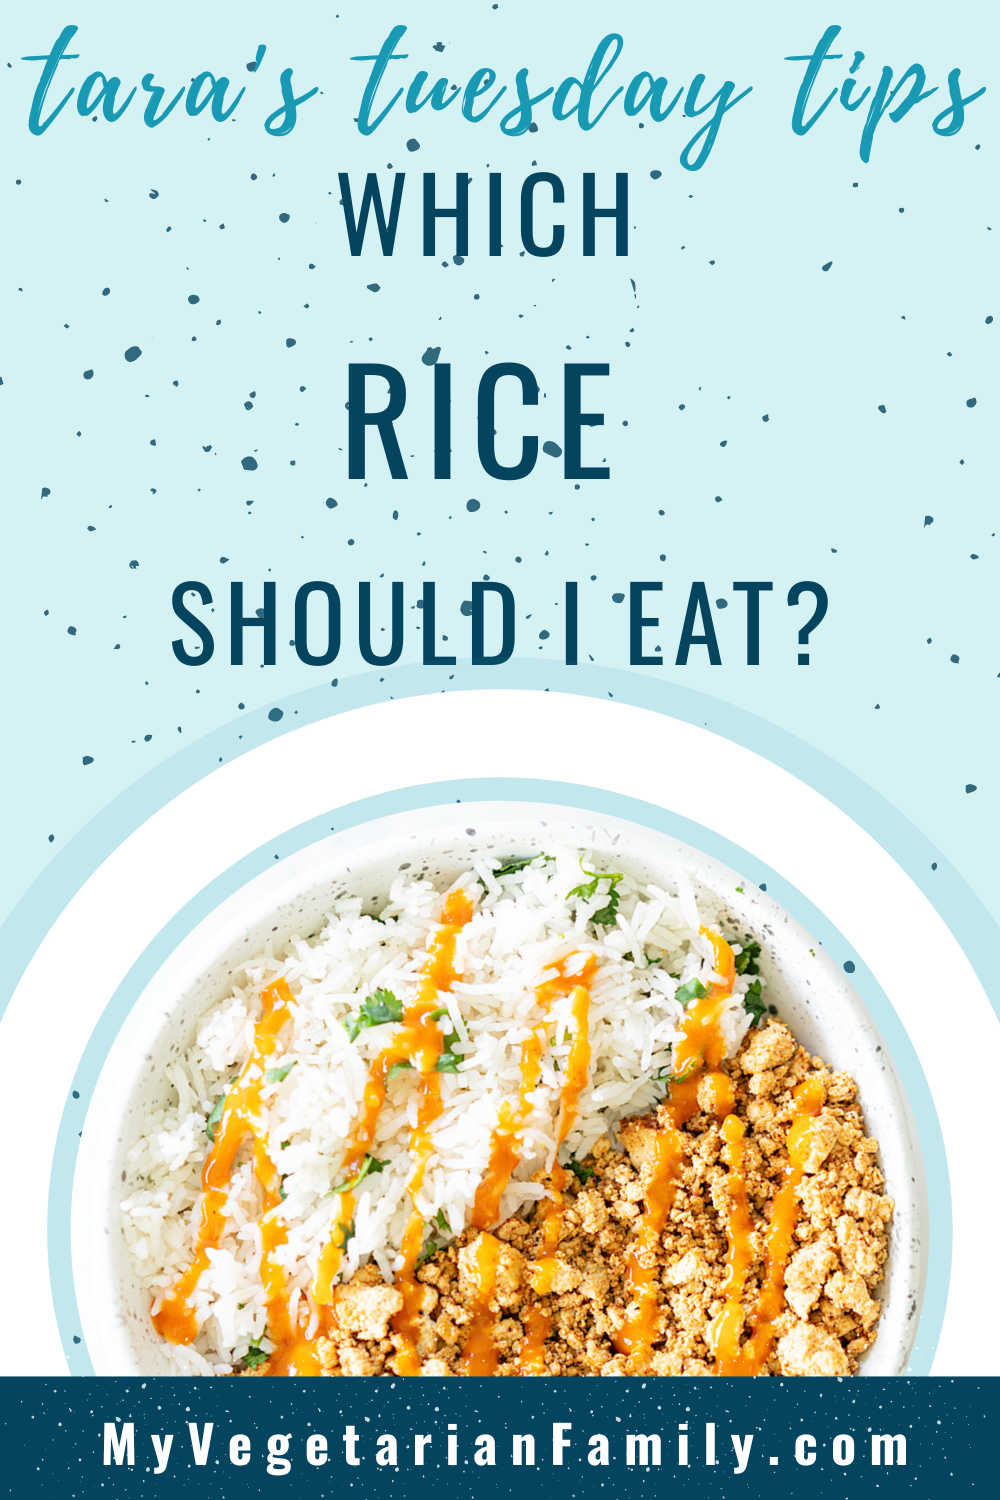 Which Rice Should I Eat? | Tara's Tuesday Tips | My Vegetarian Family #tarastuesdaytips #nutritiontips #whichriceshouldieat